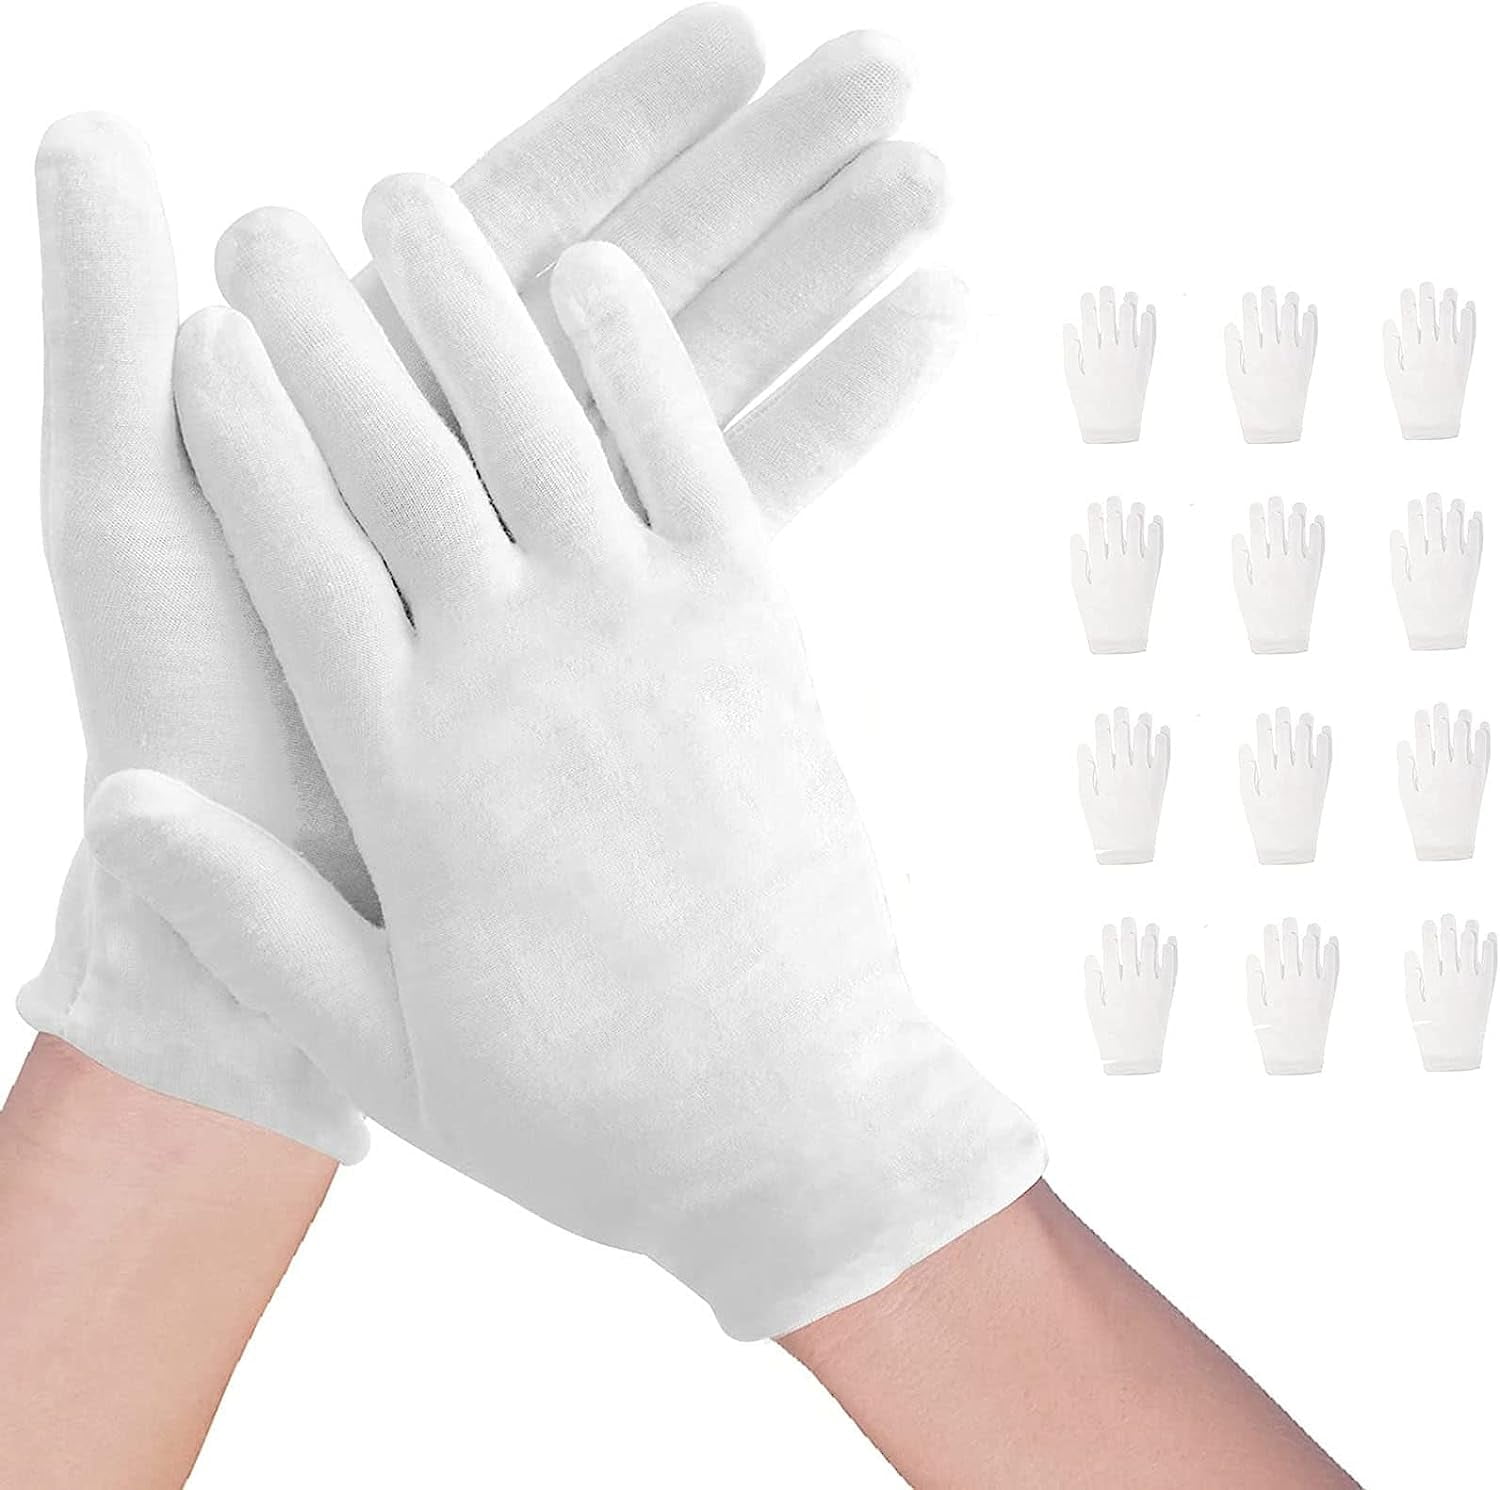 100 Percent Cotton Gloves for Dry Hands Eczema, Selizo 10 Pairs White  Cotton Gloves for Women Dry Hands Moisturizing Cosmetic Sensitive Irritated  Skin